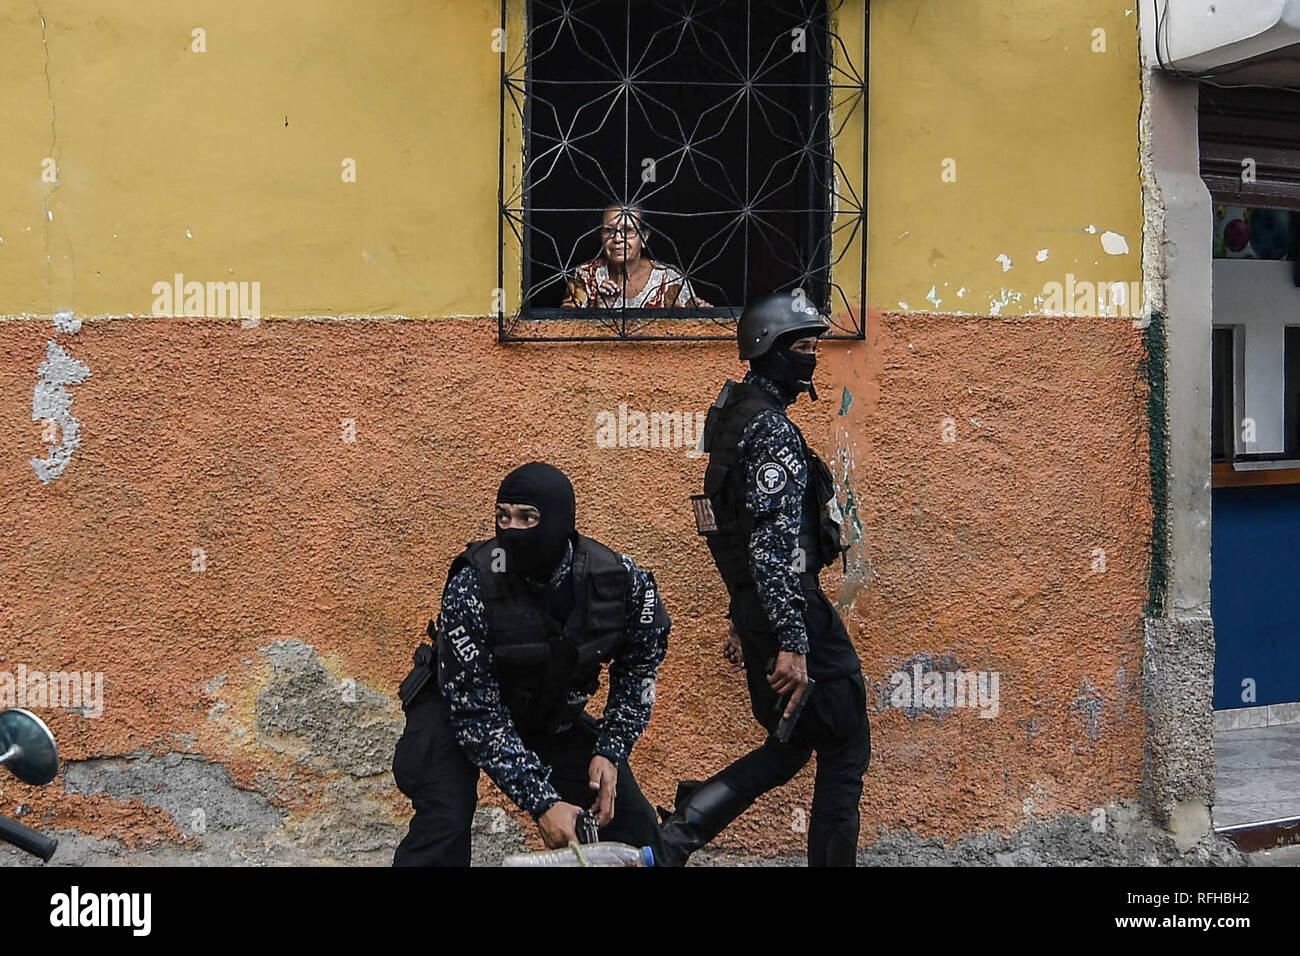 Caracas, Venezuela. 25th January 2019. Members of the Bolivarian National Police Special Forces (‘FAES’ in Spanish) seen taking position while an old woman look at them through her window during a Police raid operation against criminal groups at Petare slum in Caracas. Credit: SOPA Images Limited/Alamy Live News Stock Photo